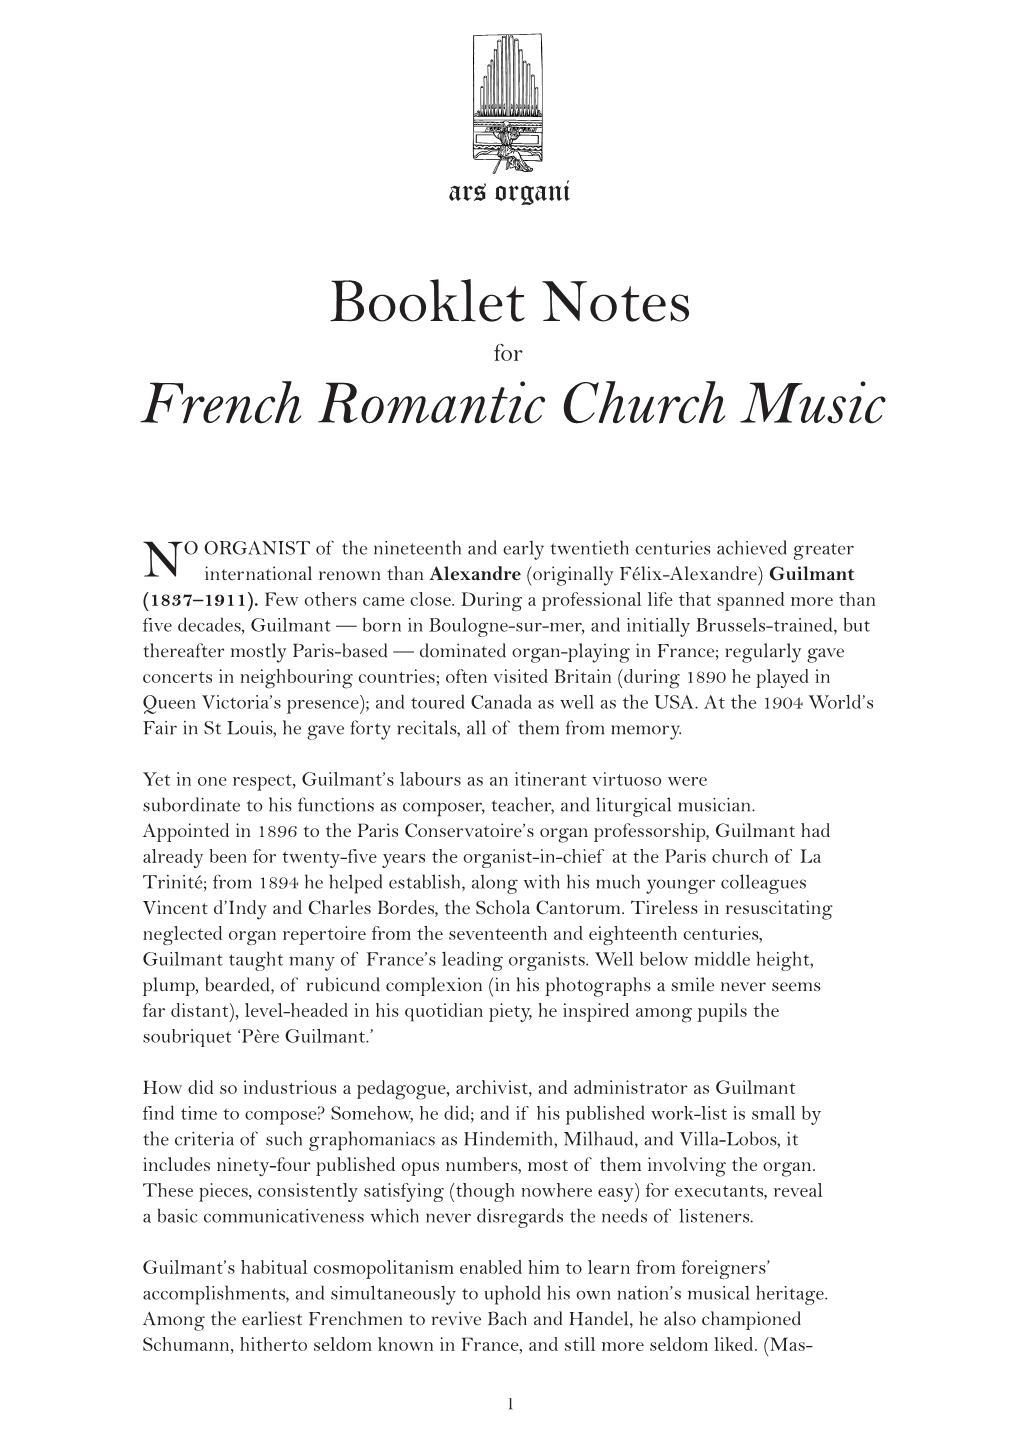 Booklet Notes French Romantic Church Music